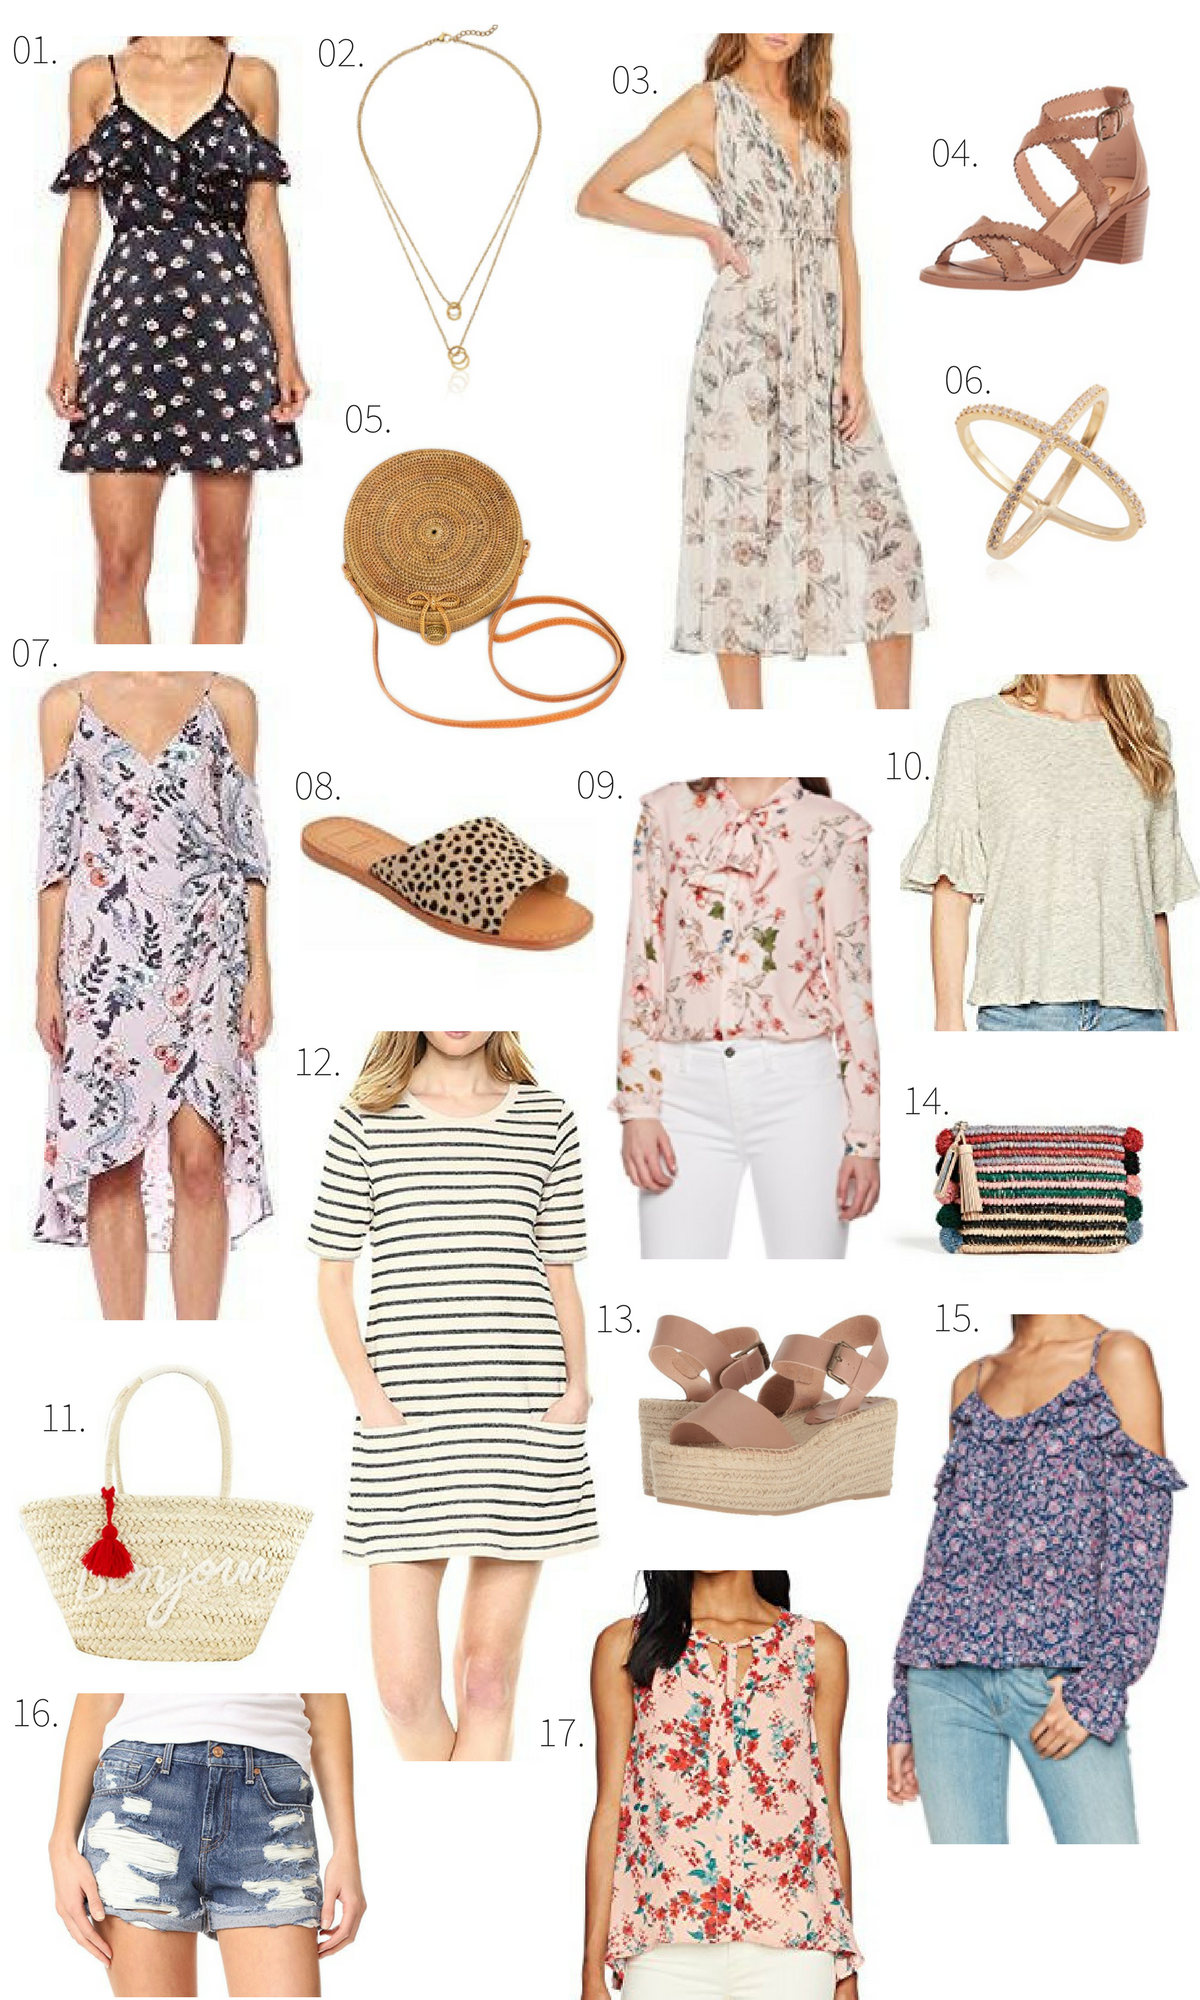 May Amazon Fashion Finds featured by popular South Carolina Fashion Blogger, The Southern Style Guide